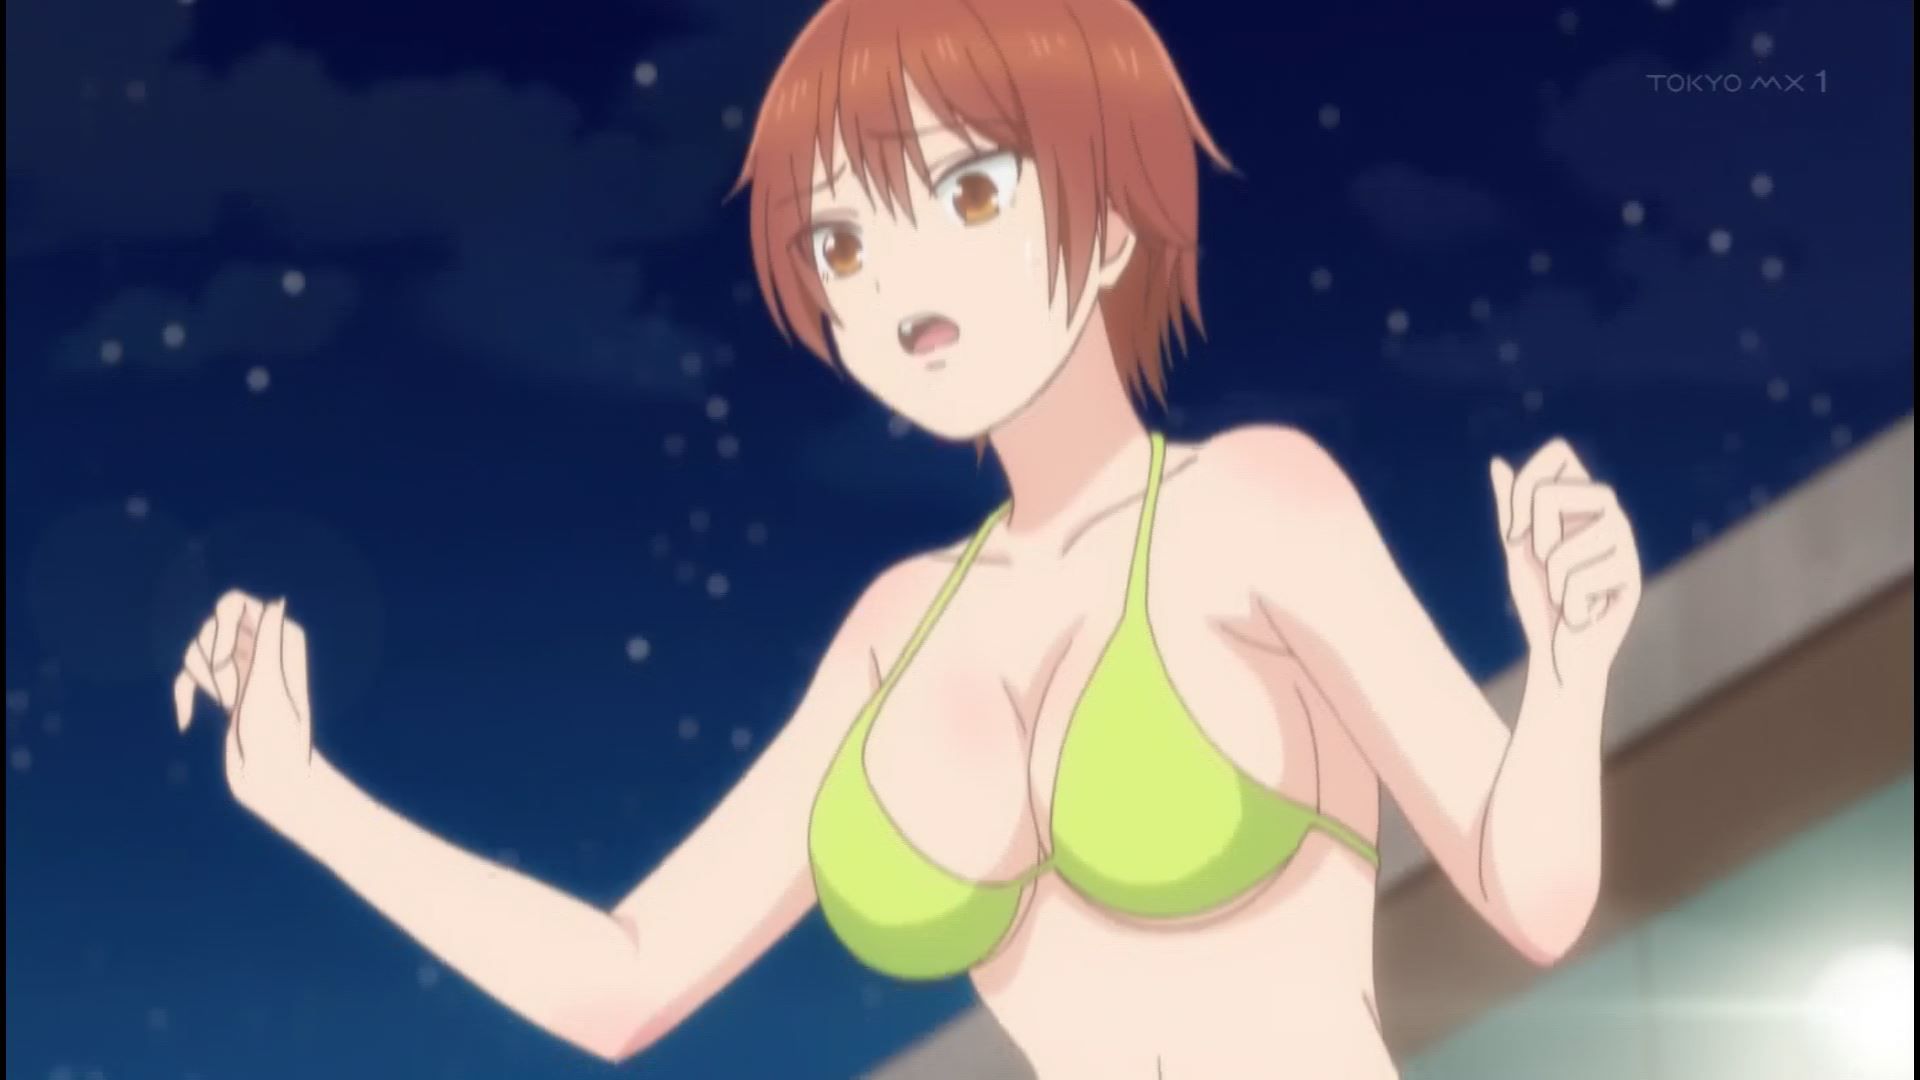 Anime [waste of high school girl] 8 episodes, such as erotic swimsuit and erotic dressing of girls 19